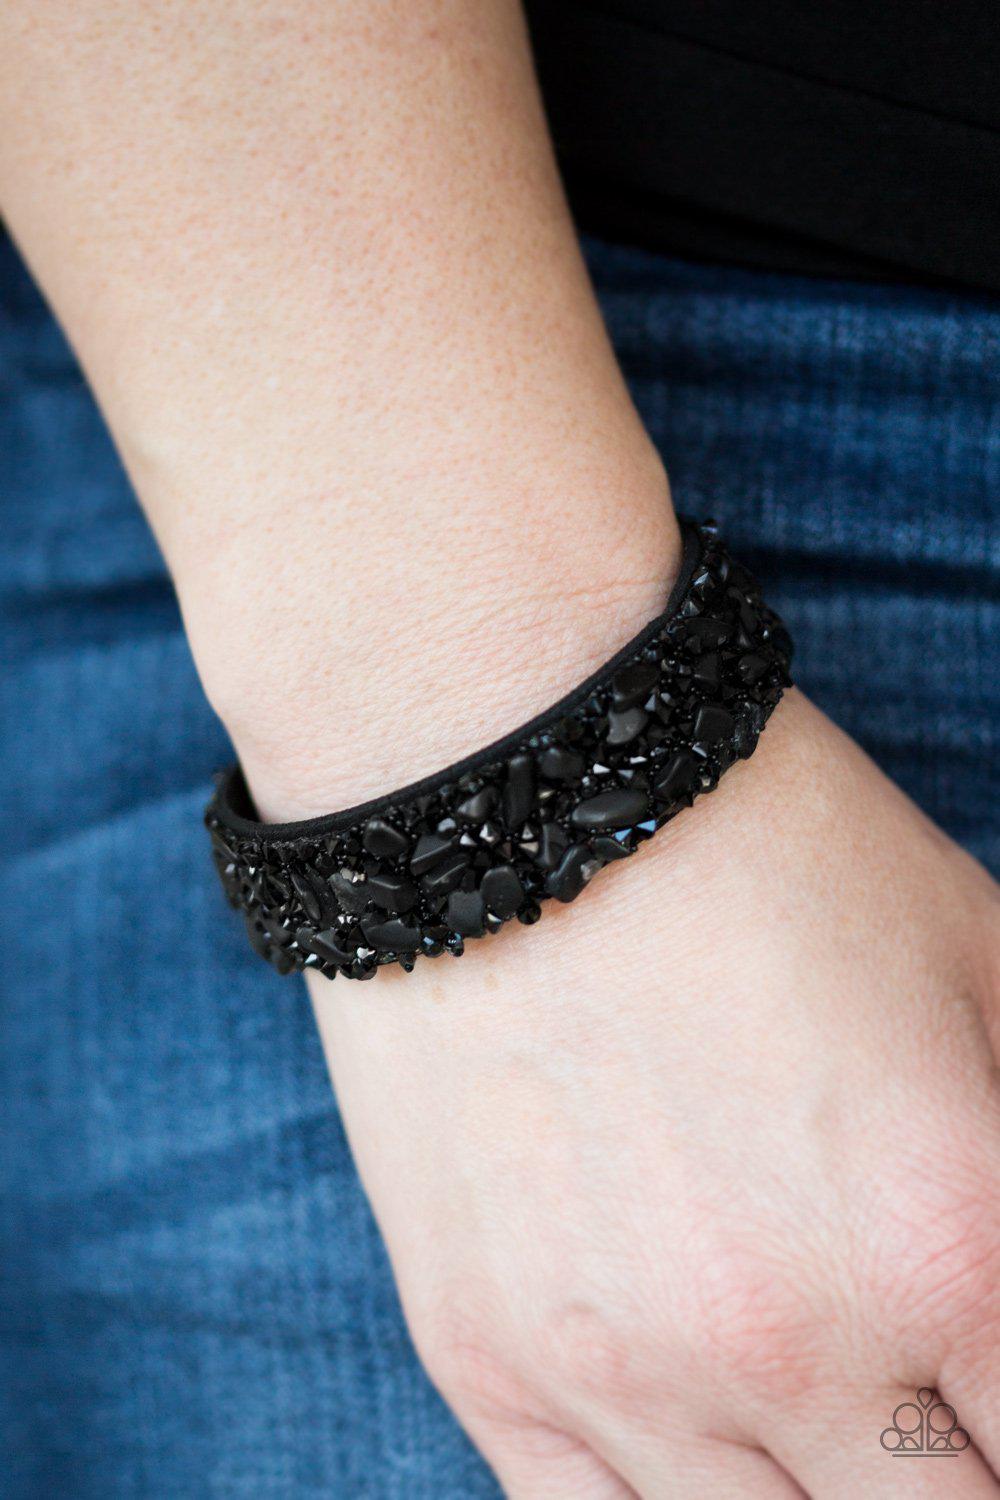 Totally Crushed It Black Crushed Stone Urban Wrap Snap Bracelet - Paparazzi Accessories-CarasShop.com - $5 Jewelry by Cara Jewels